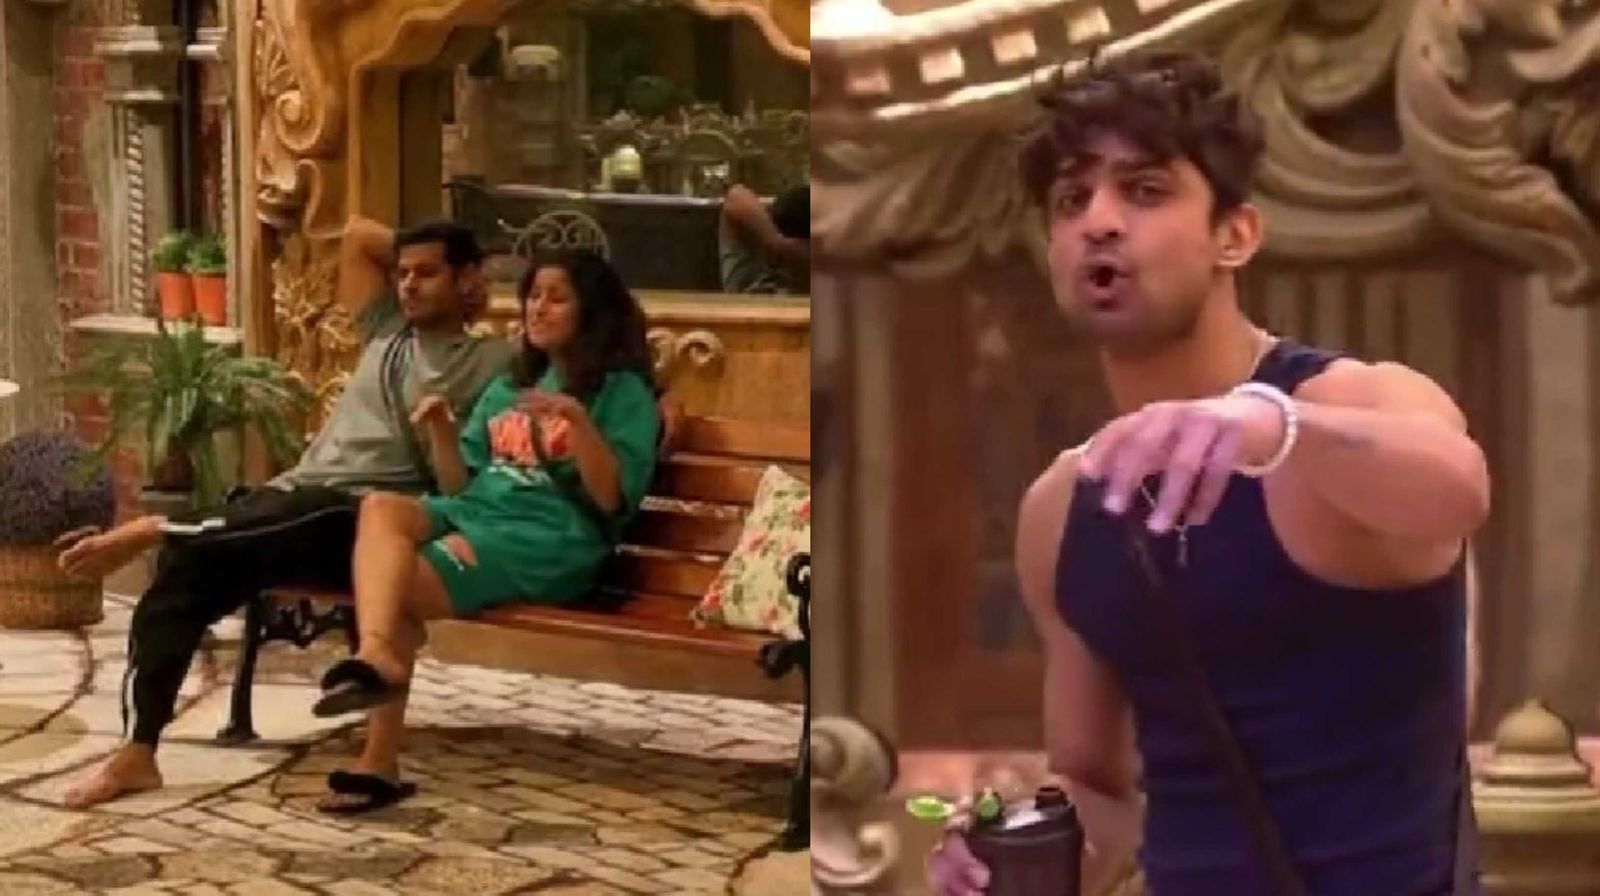 ‘She needs therapy’: Bigg Boss 17 fans slam Aishwarya for poking Abhishek in unseen video from live feed; watch